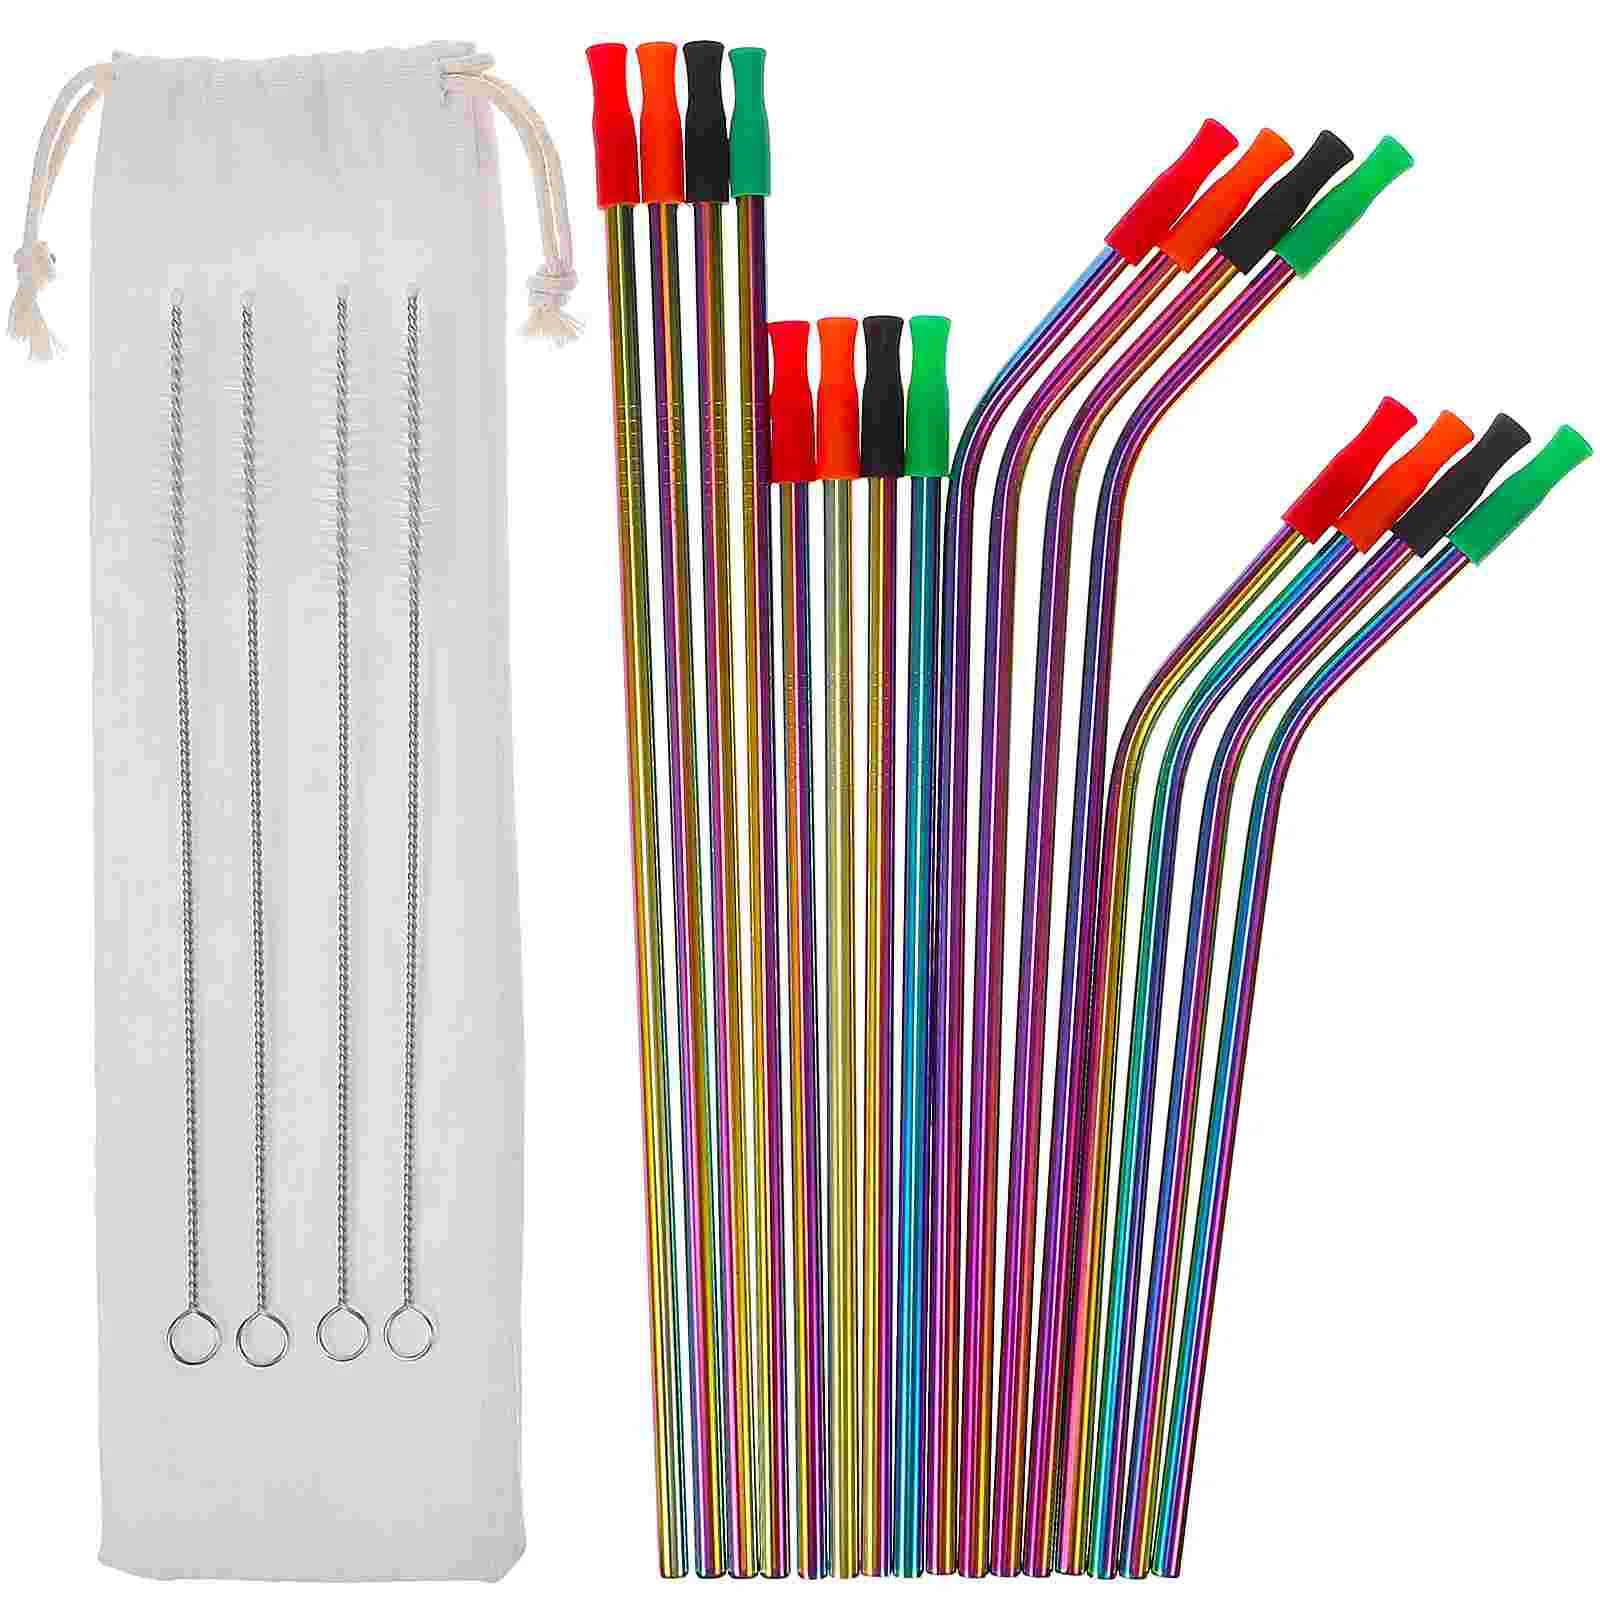 

16Pcs Drinking Straws with Silicone Tips Cover Stainless Steel Straws with 4 Cleaning Brushes and Carry Bag for Cold Hot Drinks